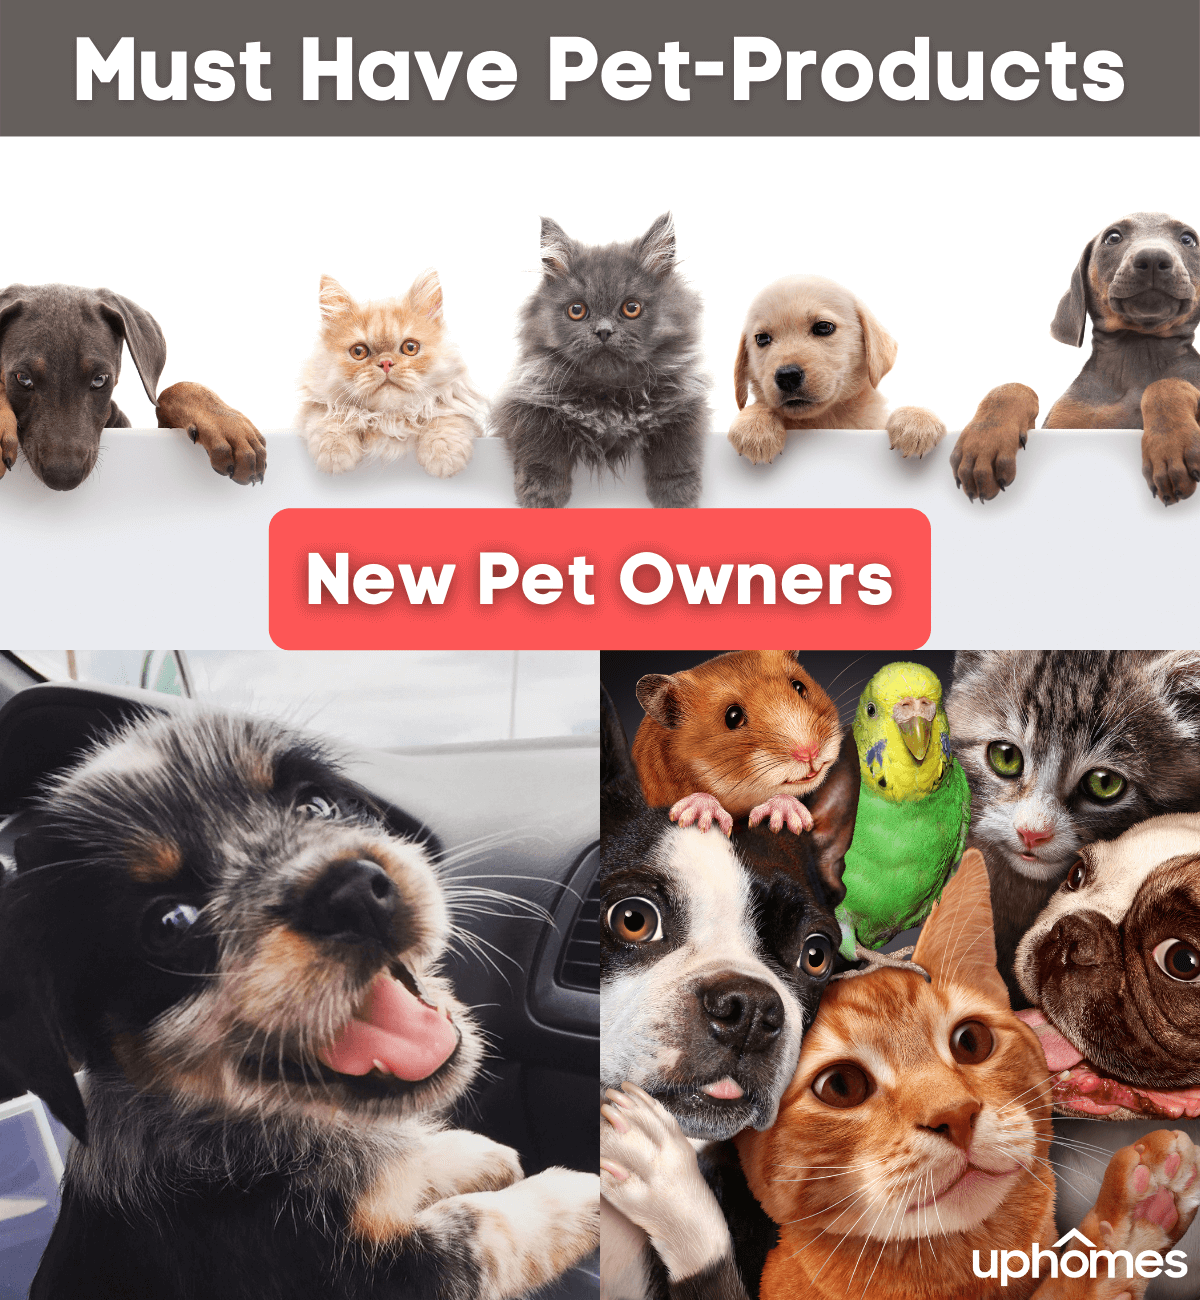 Photo of New Pets with dogs, cats, bird, puppies and more - Must have pet product for new pet owners!